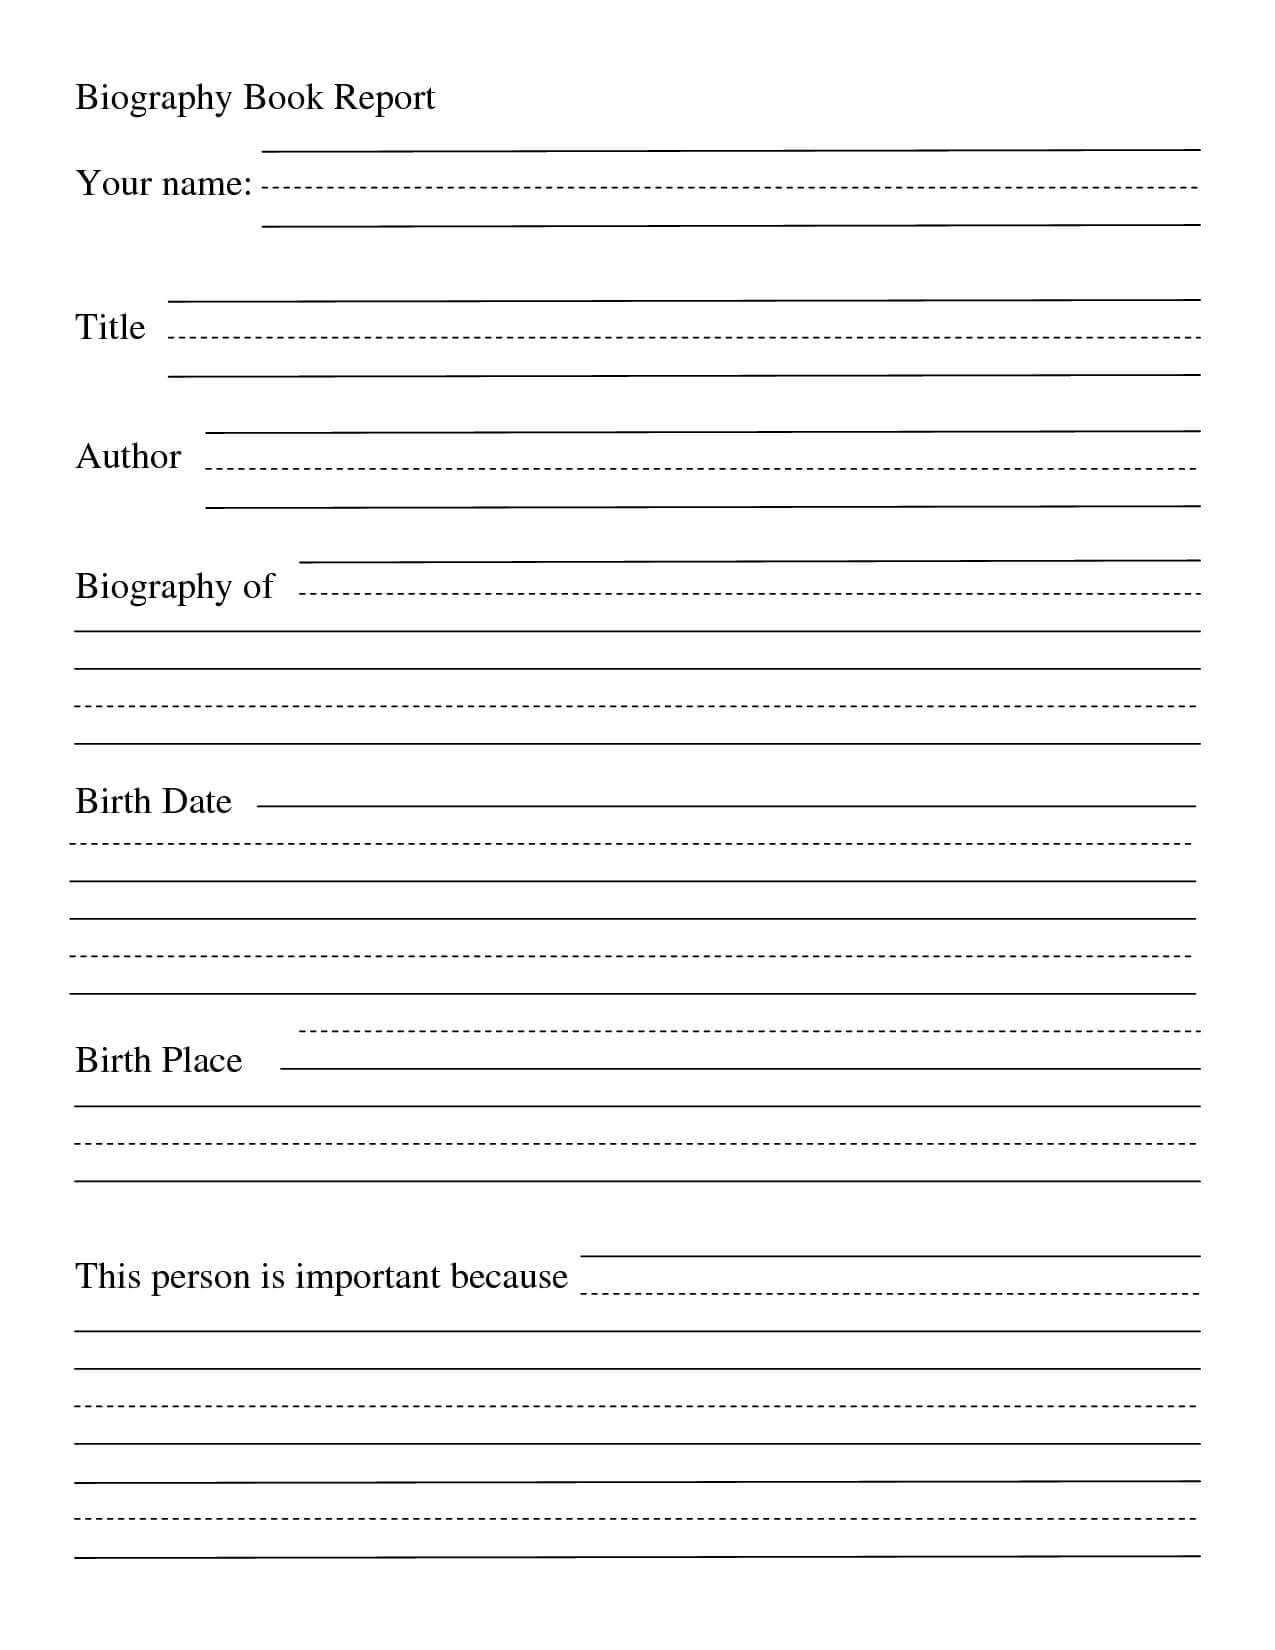 004 Biography Book Report Template Formidable Ideas Pdf High Intended For Book Report Template High School